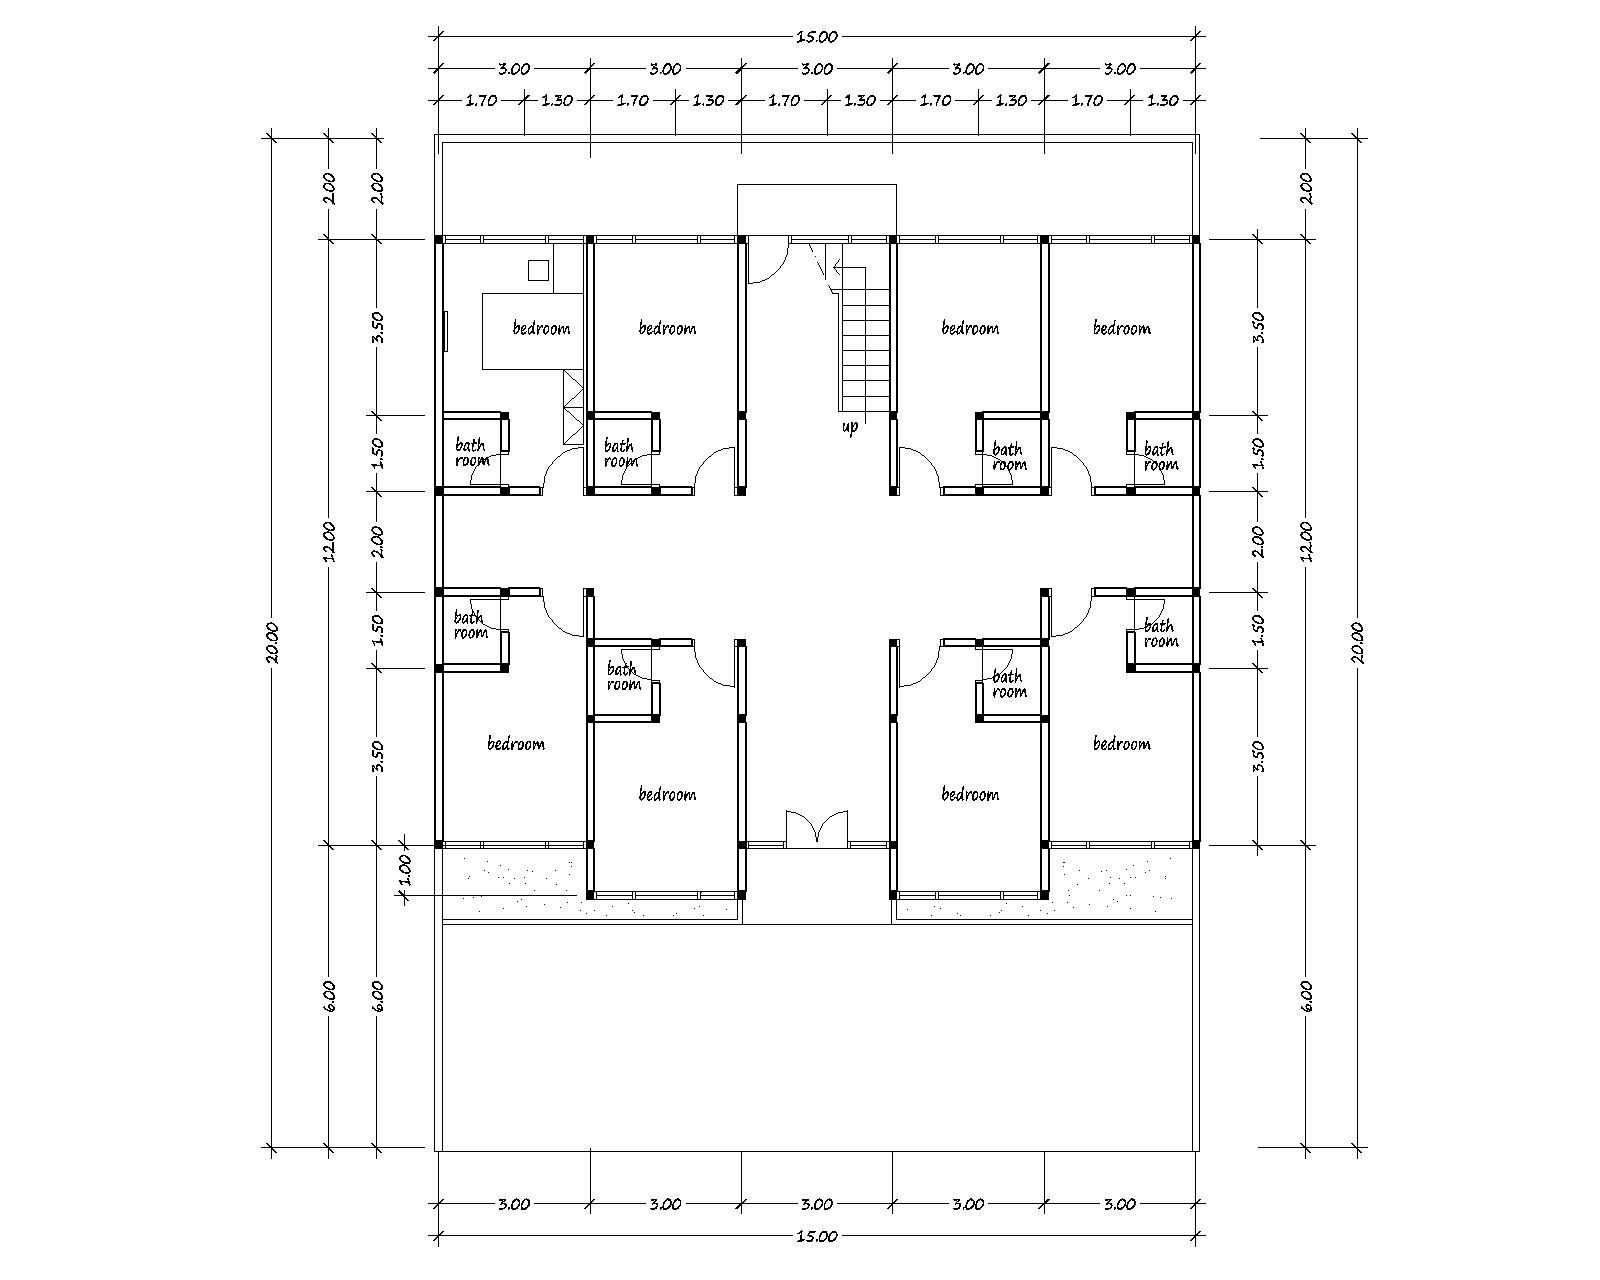 house plans for you plans, image, design and about house